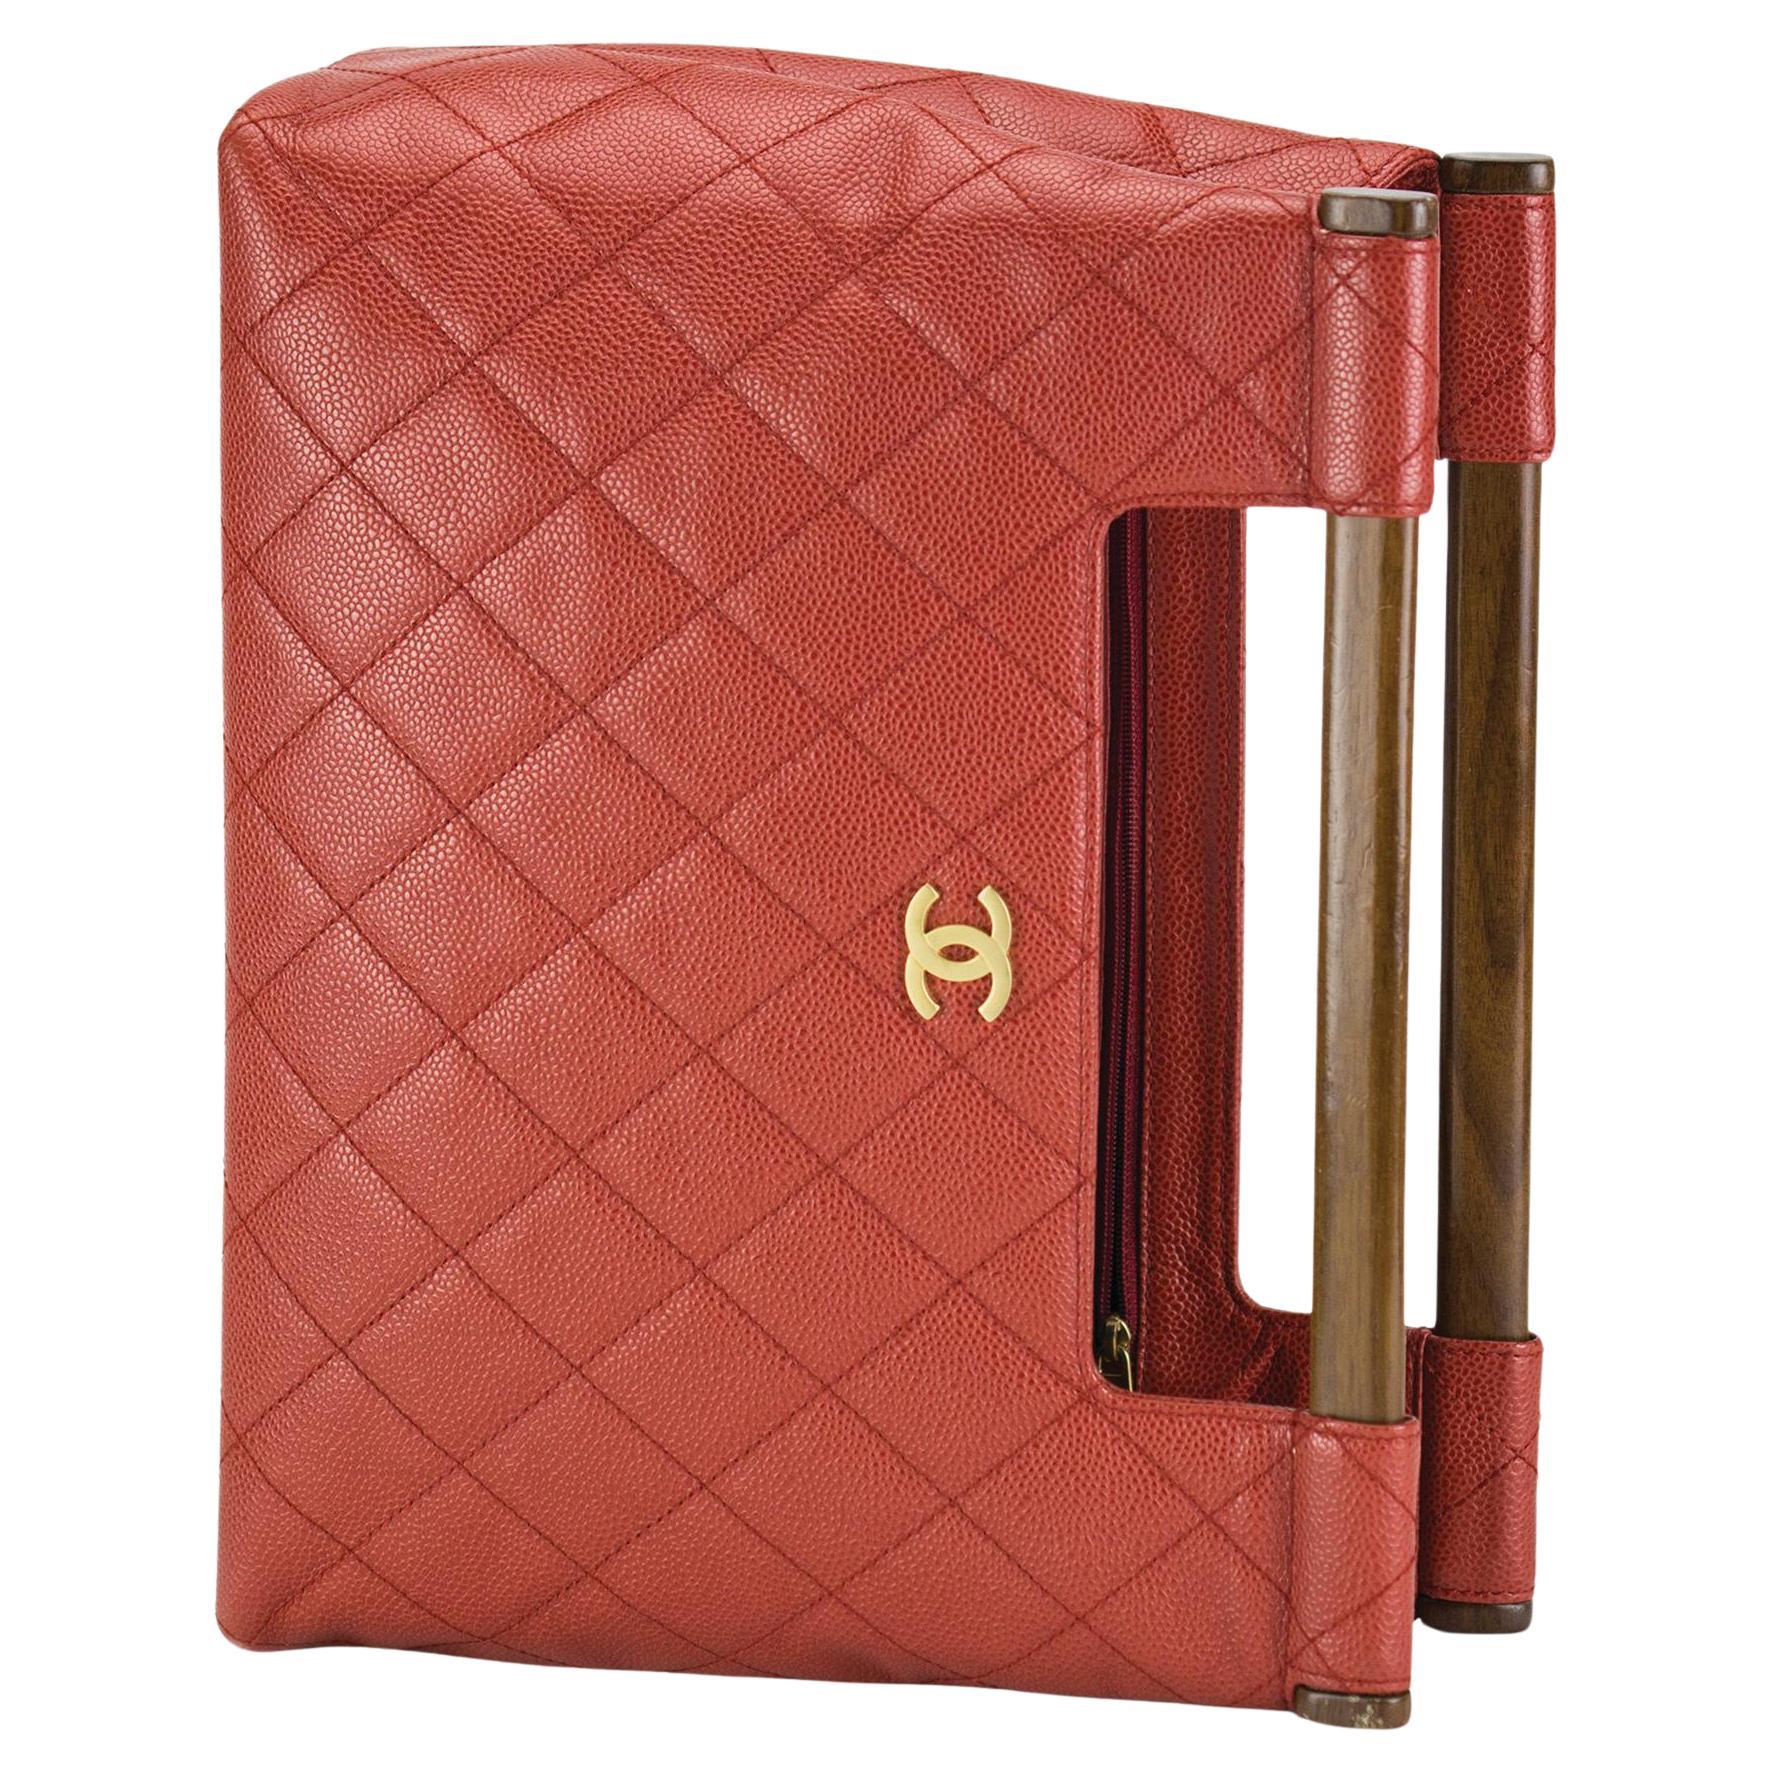 Chanel 2003 Wood Top Handle Rare Red Caviar Jumbo Kelly Envelope Clutch Tote Bag For Sale